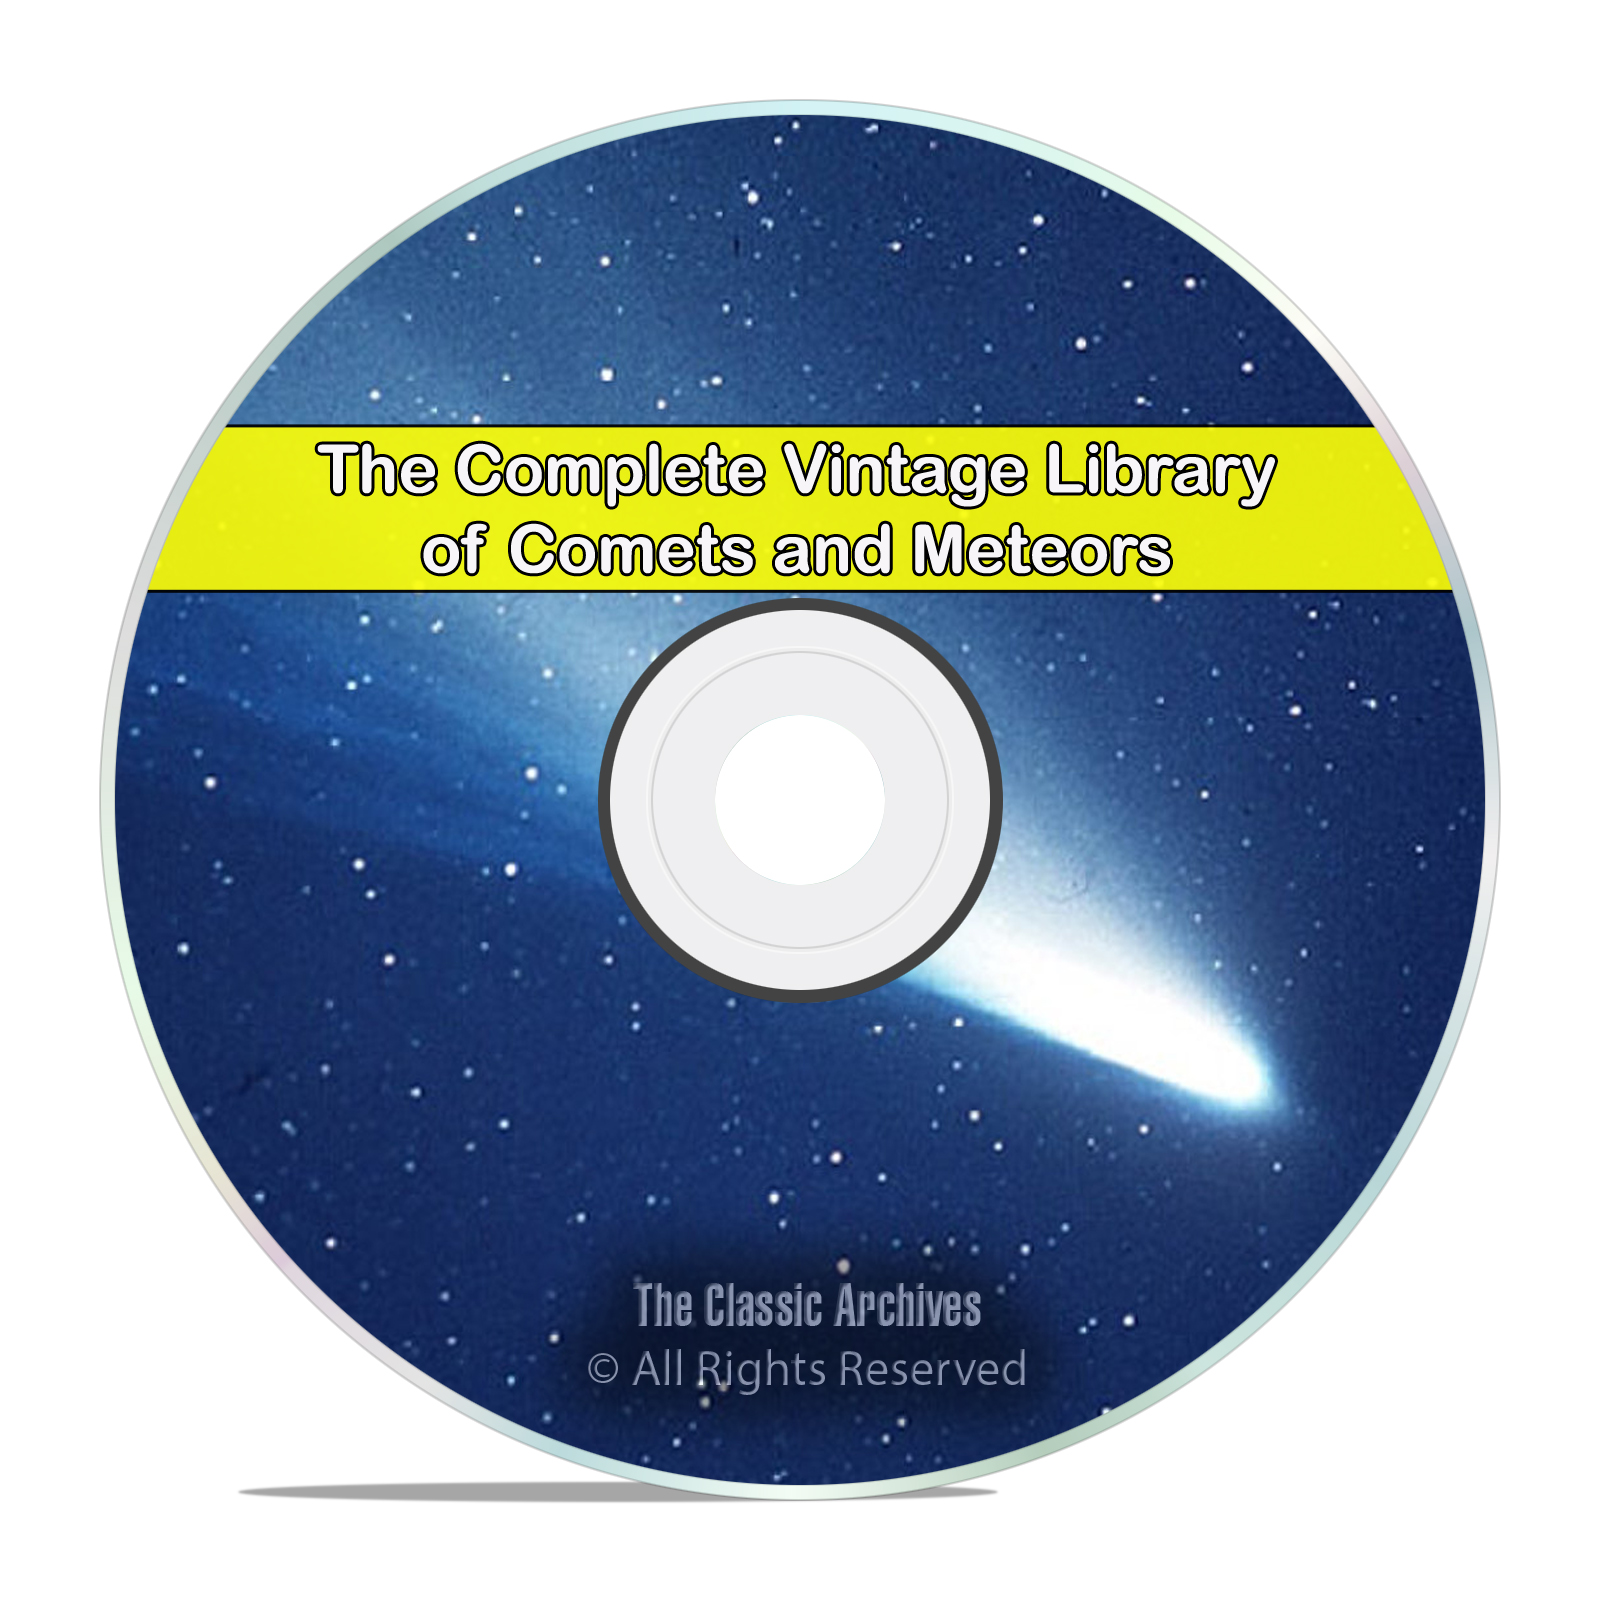 Library of Comets & Meteors, 76 Books on Astronomy Meteorites Stars PDF DVD